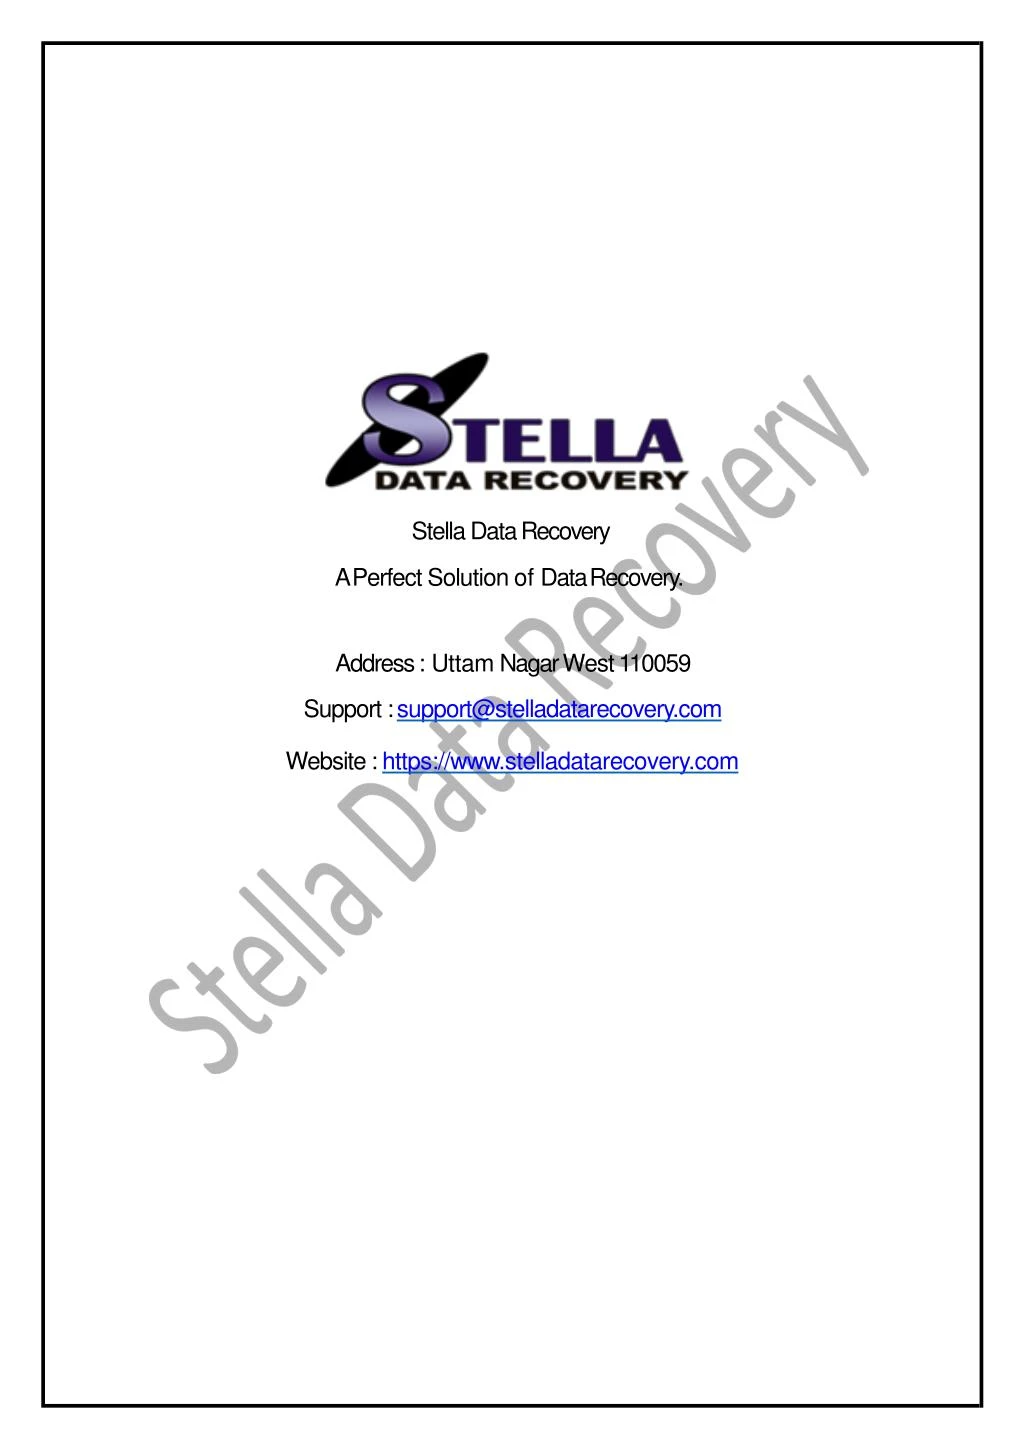 stella data recovery a perfect solution of data